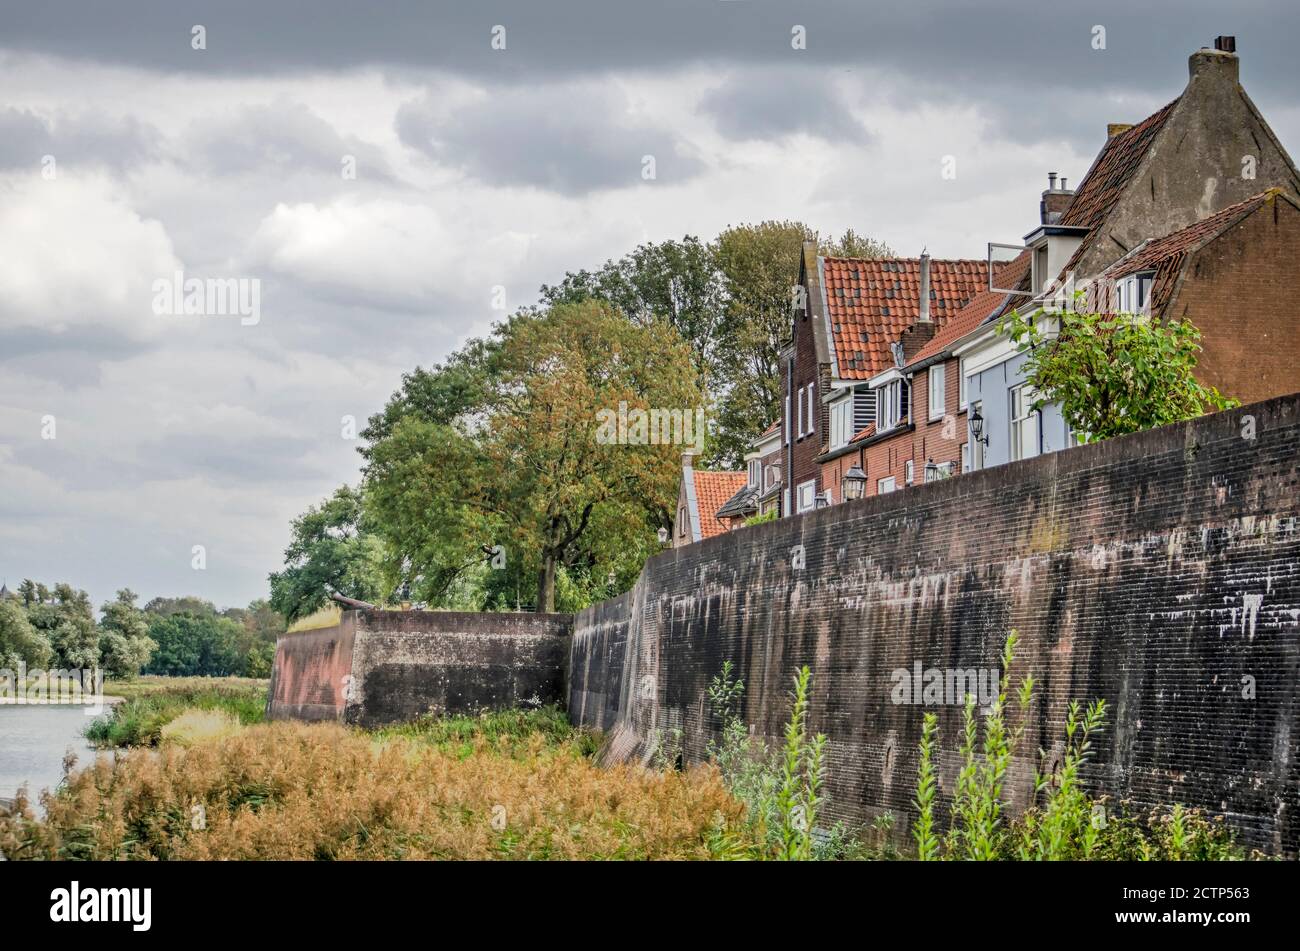 Woudrichem, The Netherlands, September 23, 2020: houses built on the town's wall, overlooking the surrounding nature and the river Waal Stock Photo